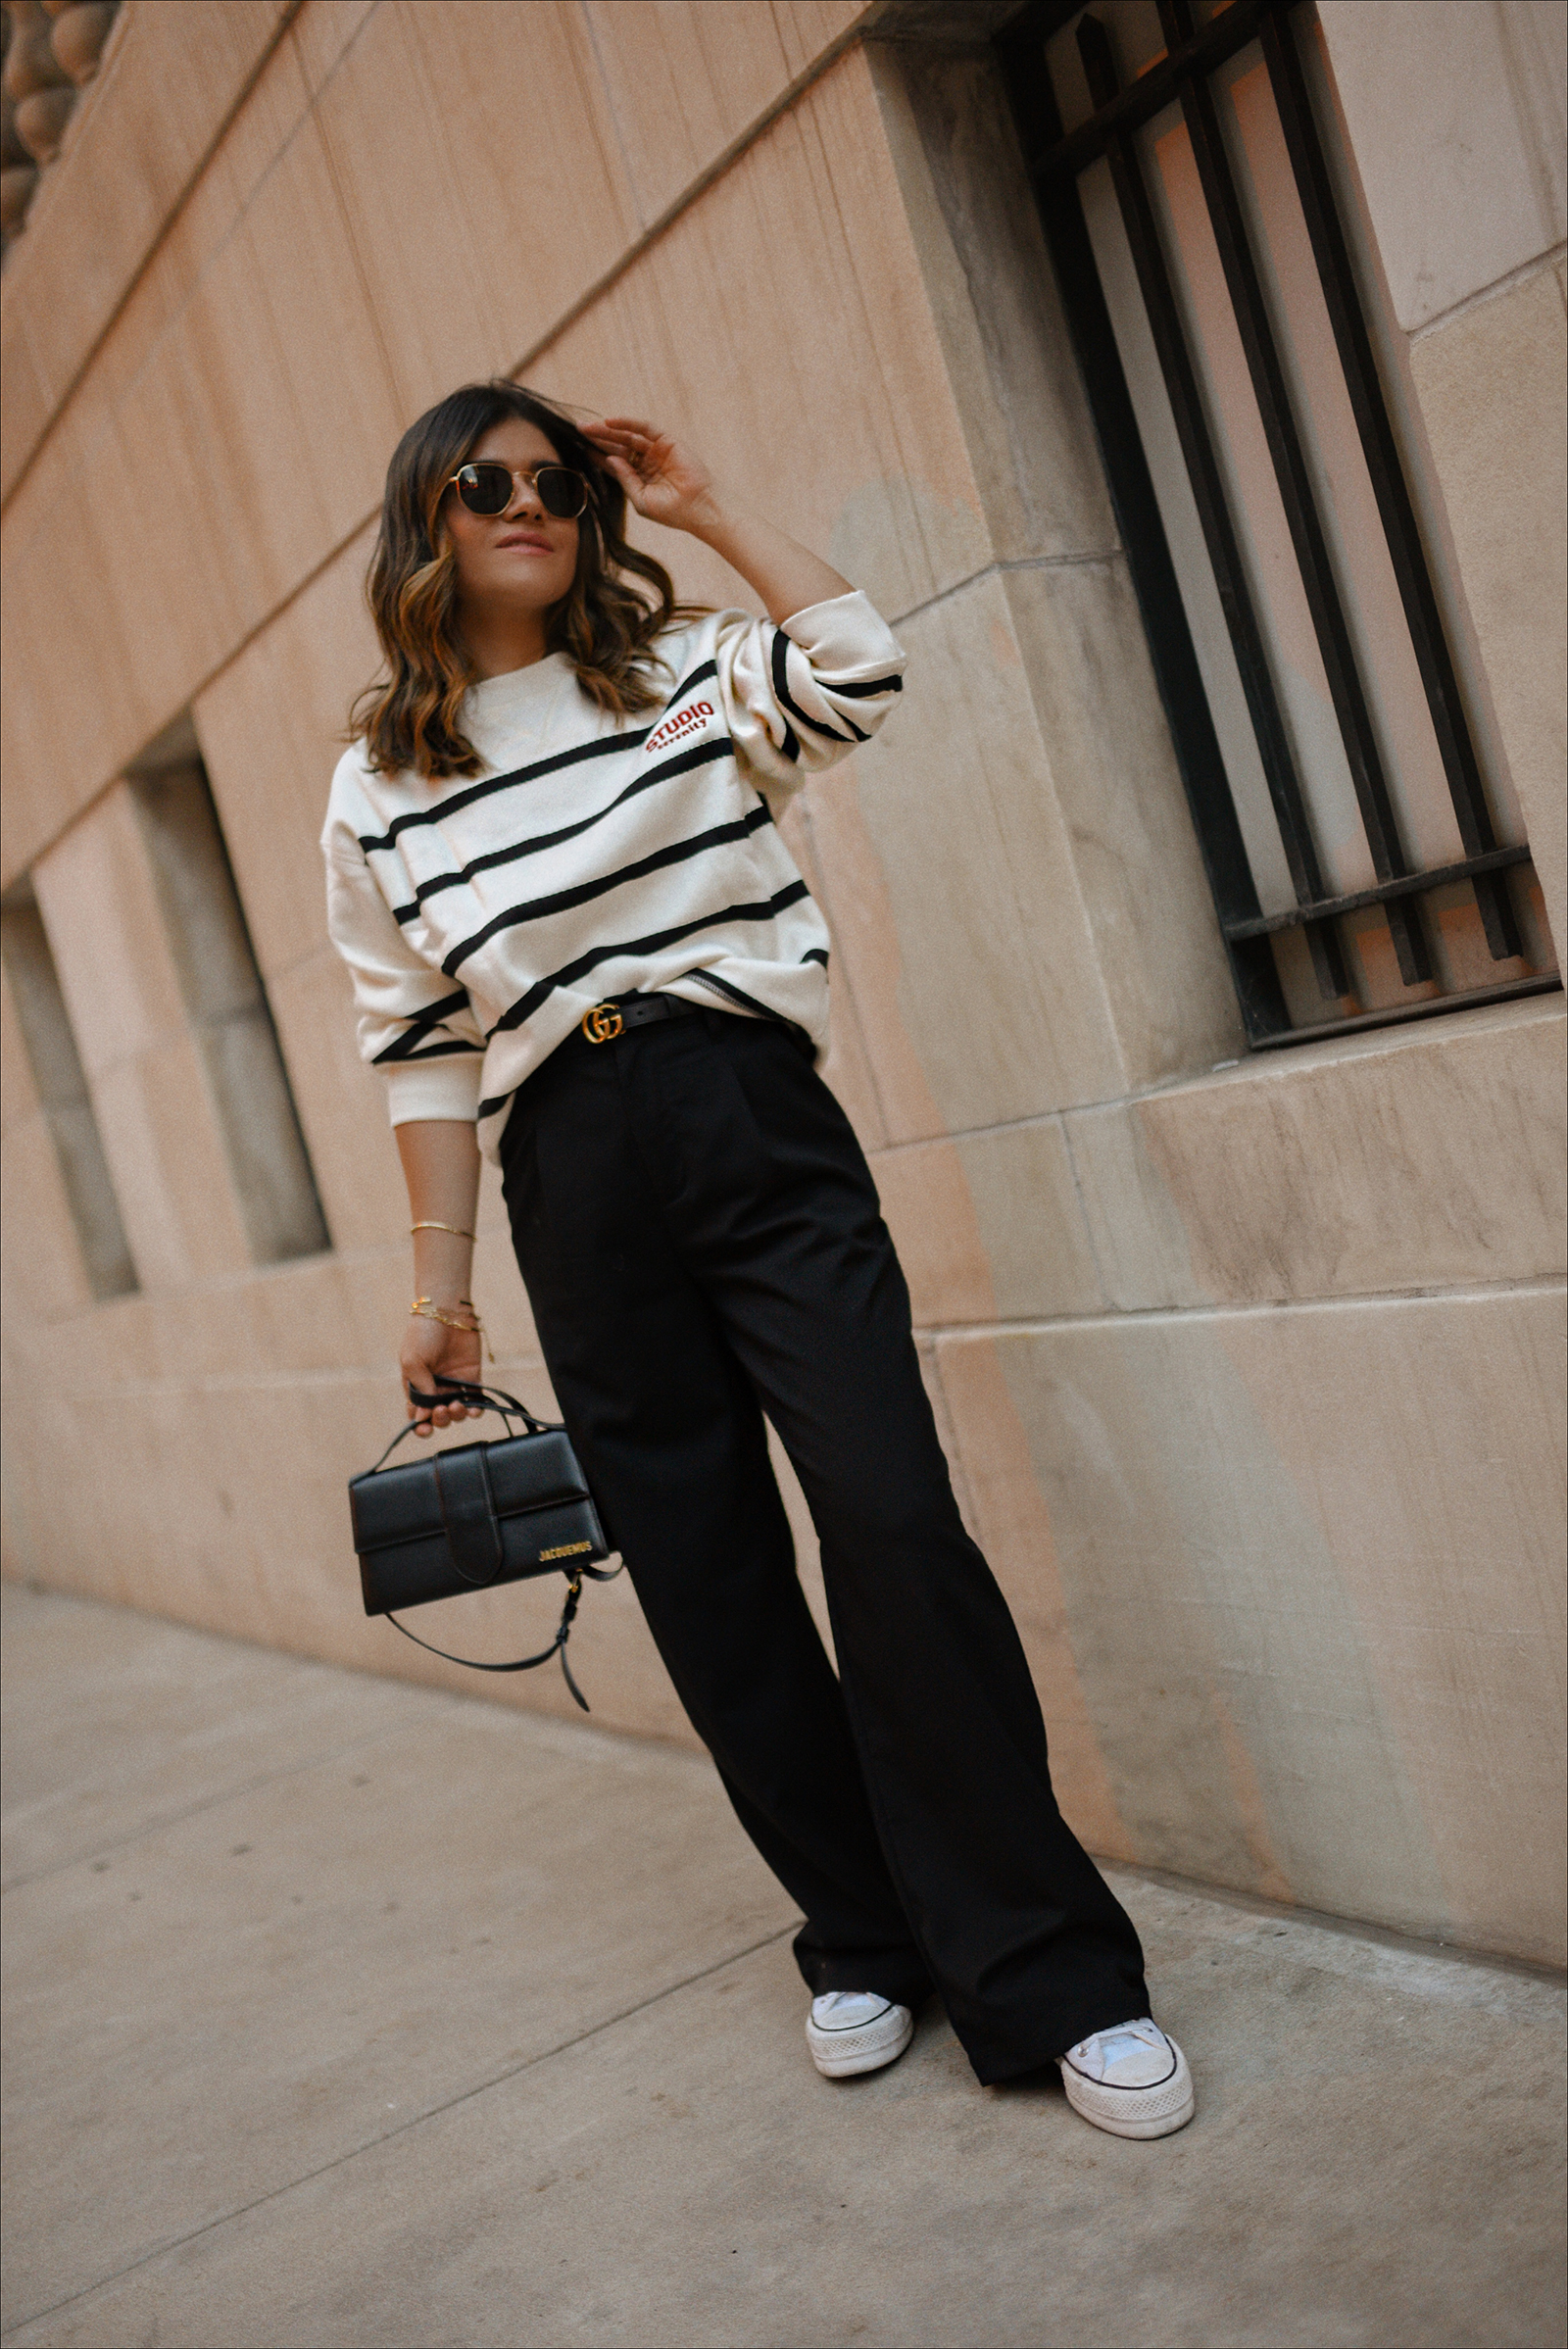 PINTEREST MOST POPULAR OUTFITS - CHIC TALK